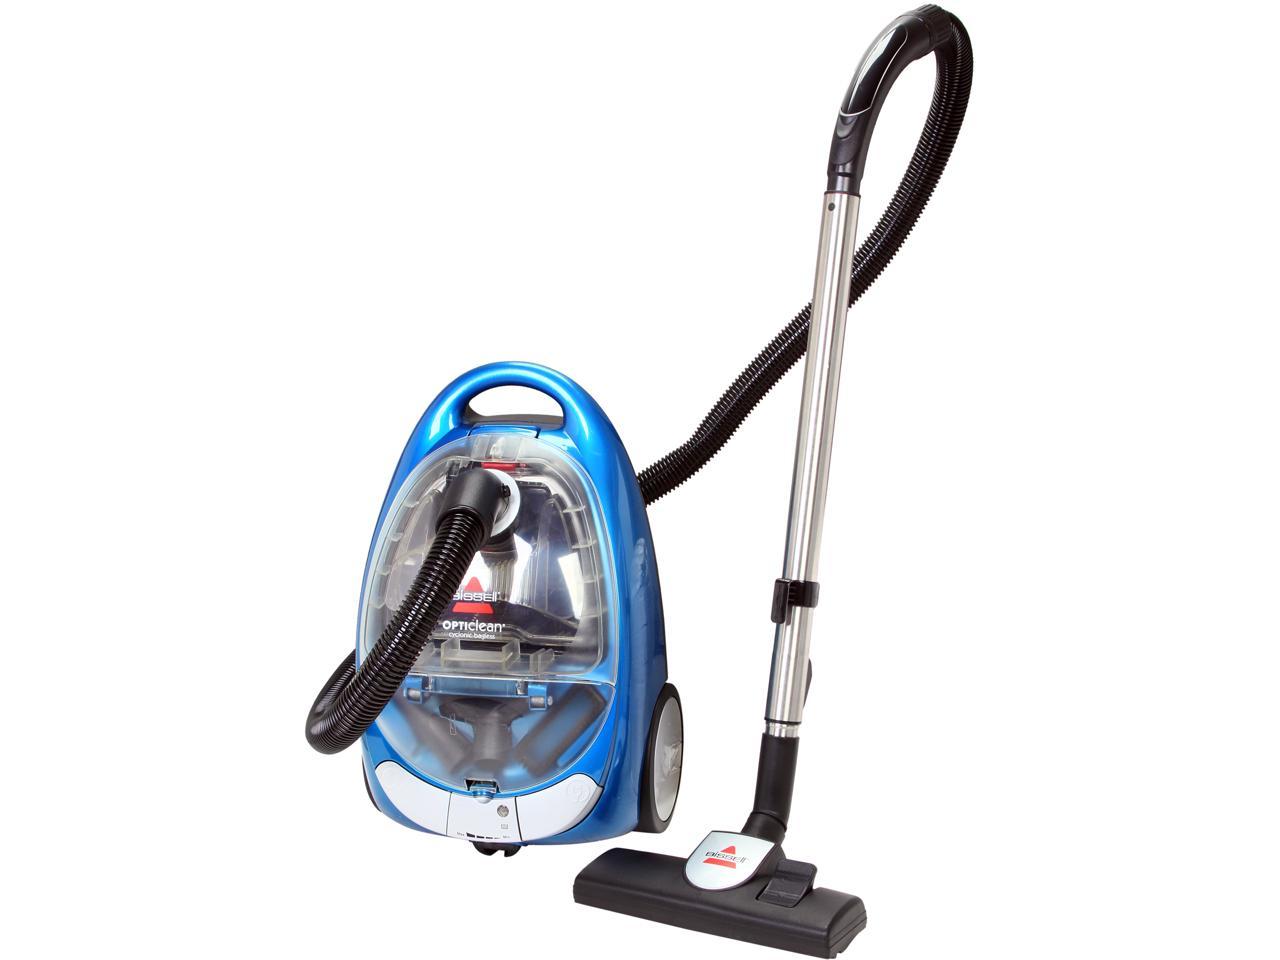 Details about   BISSELL CANISTER VACUUM  OPTI CLEAN CYCLONIC MOTOR 2037317 model 66T6